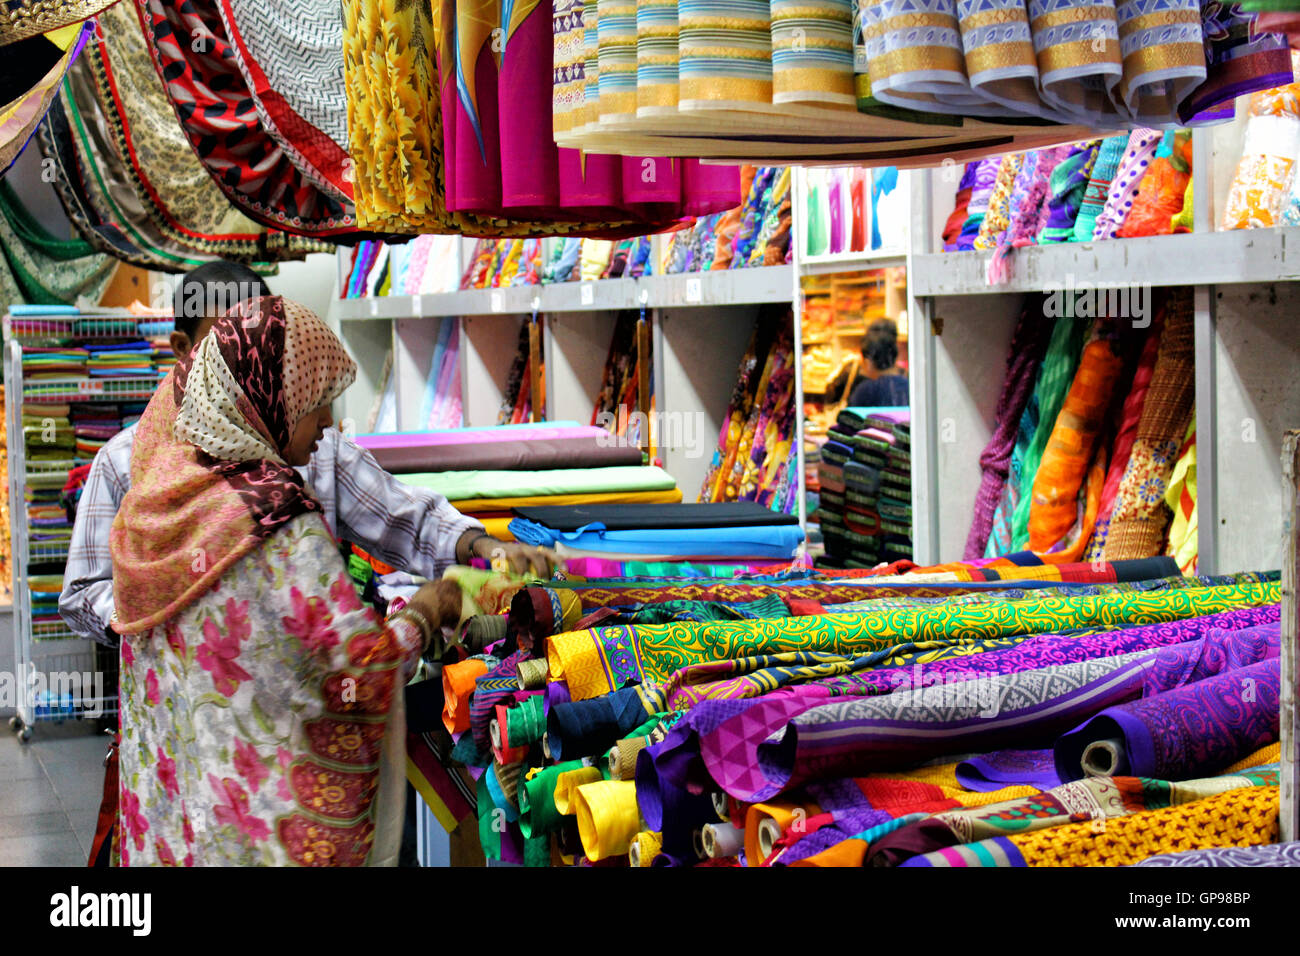 SINGAPORE/SINGAPORE - CIRCA NOVEMBER 2015: Lady with hijab buying colorful materials in Singapore's Little India district Stock Photo